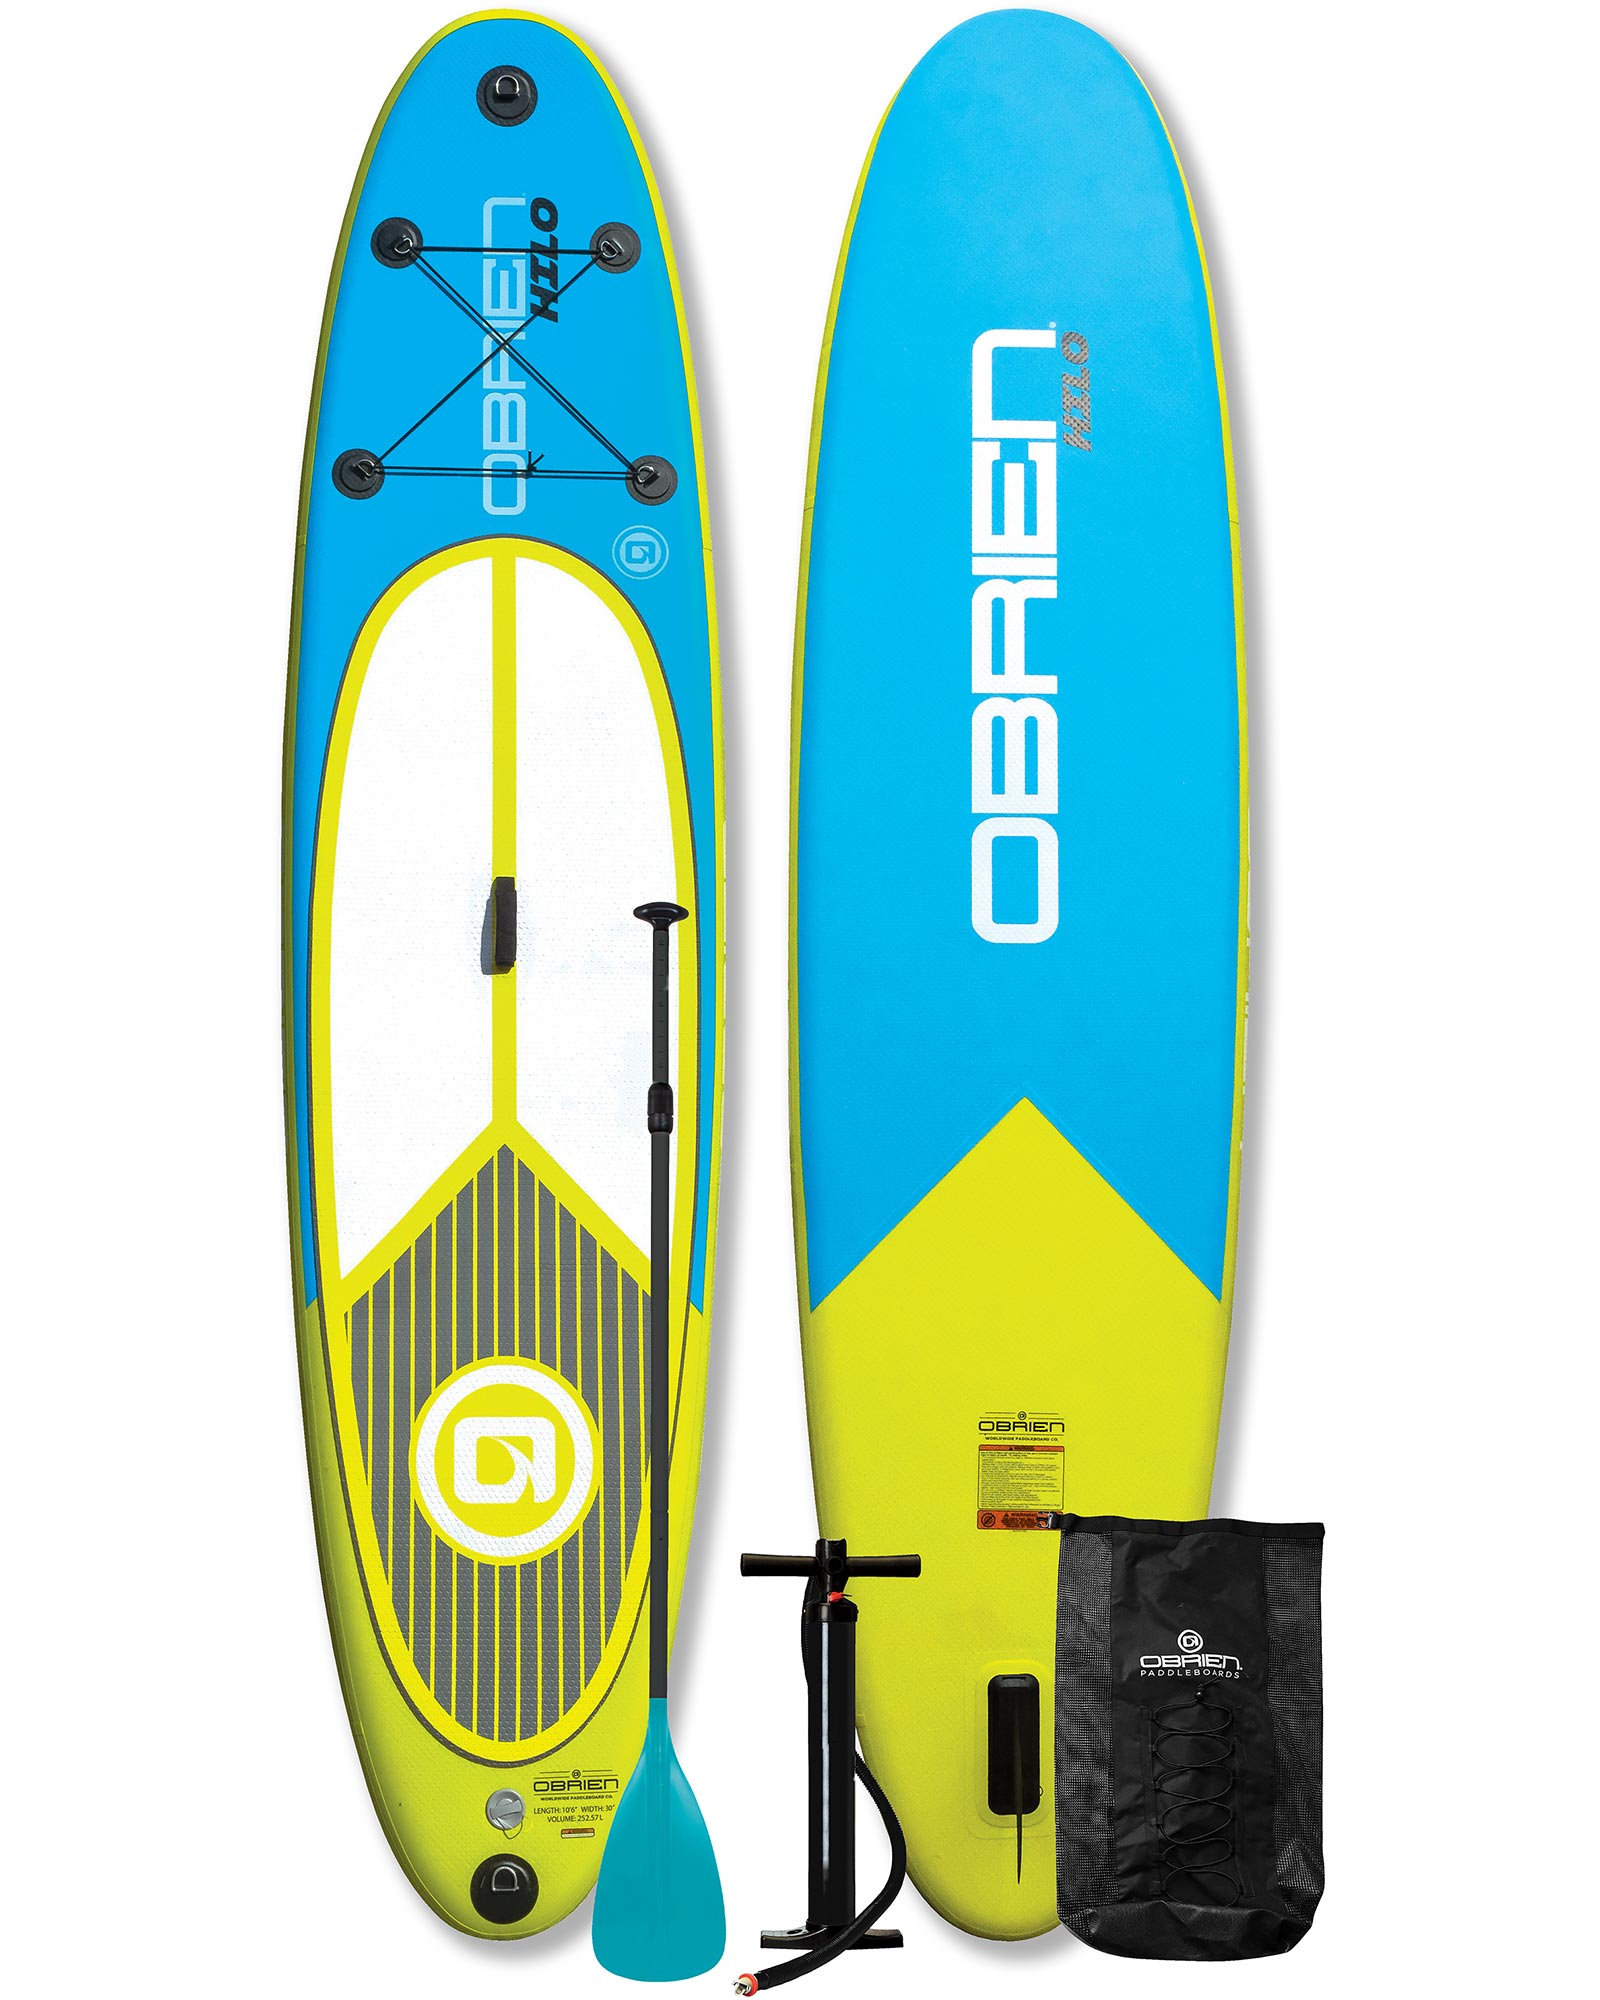 O'BRIEN Hilo 10'6 Inflatable Stand-Up Paddleboard Package